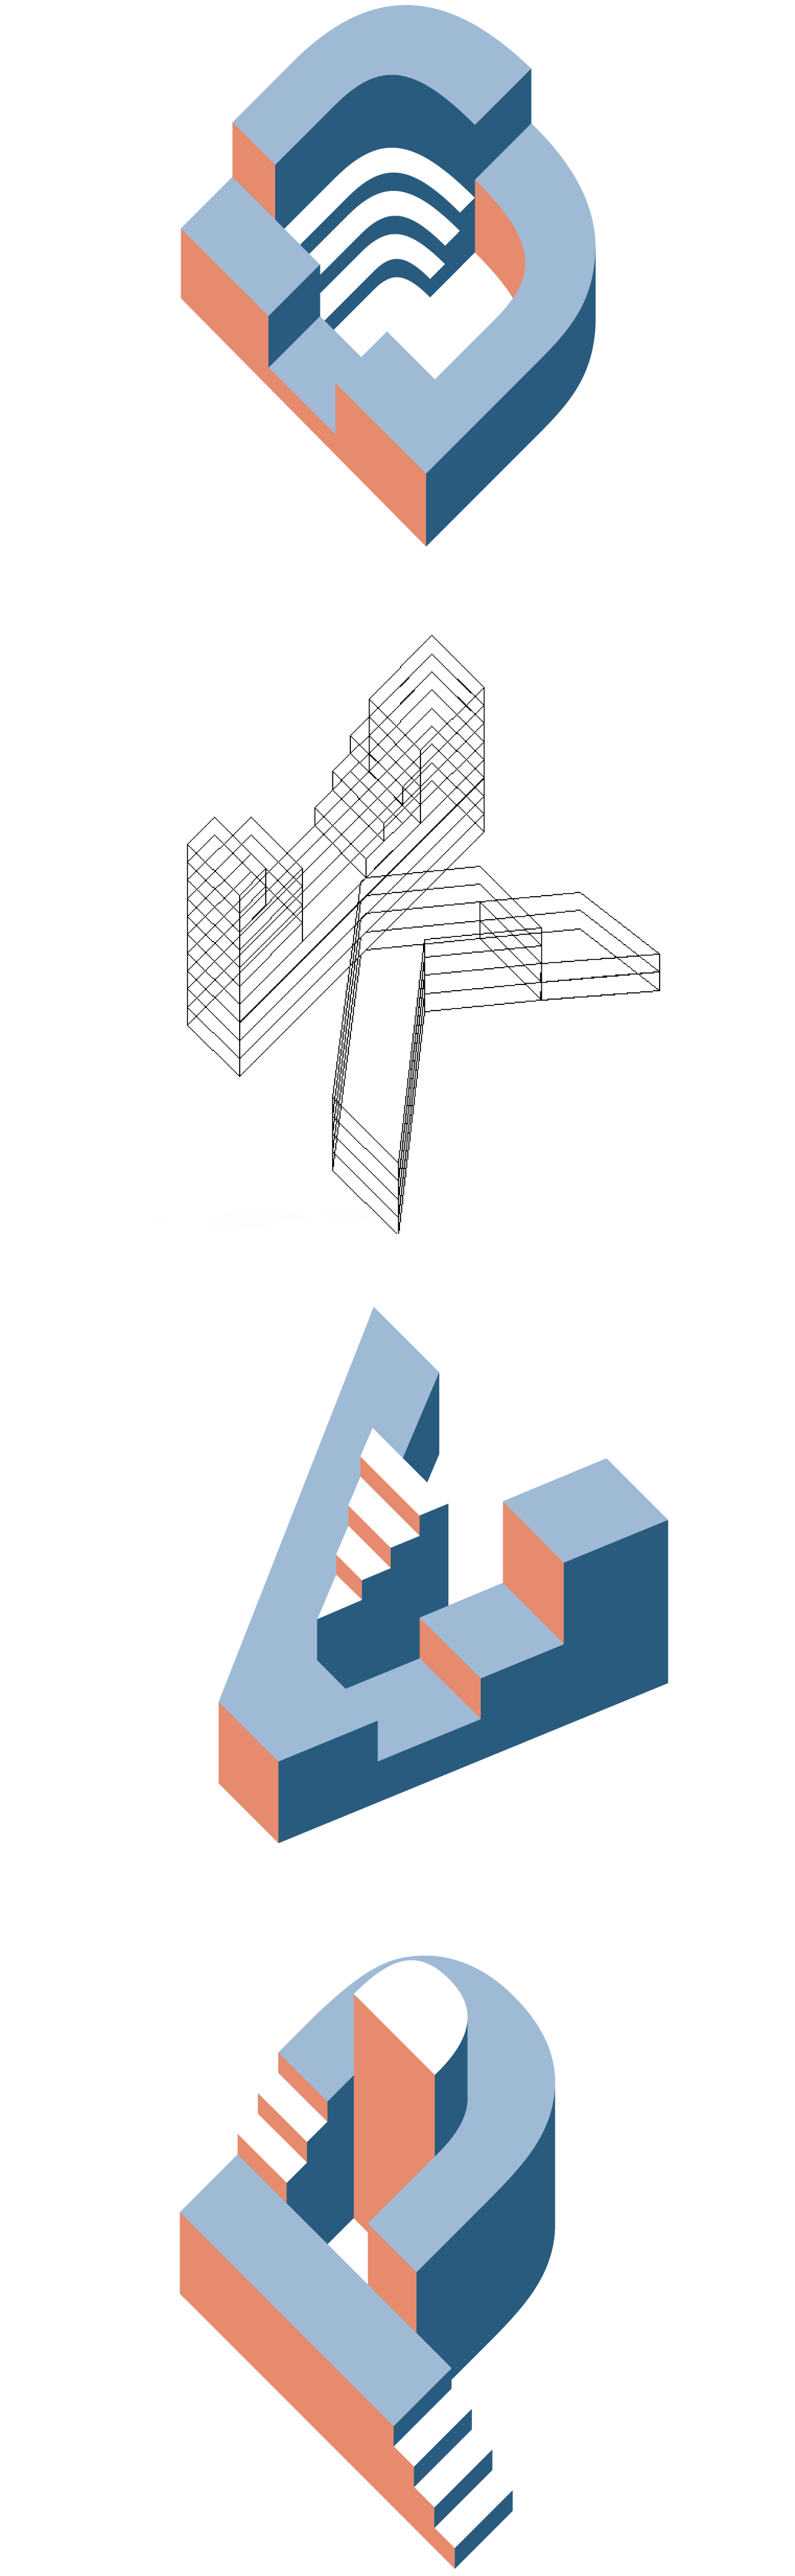 Isometric illustrations of the letters D, K, V and P